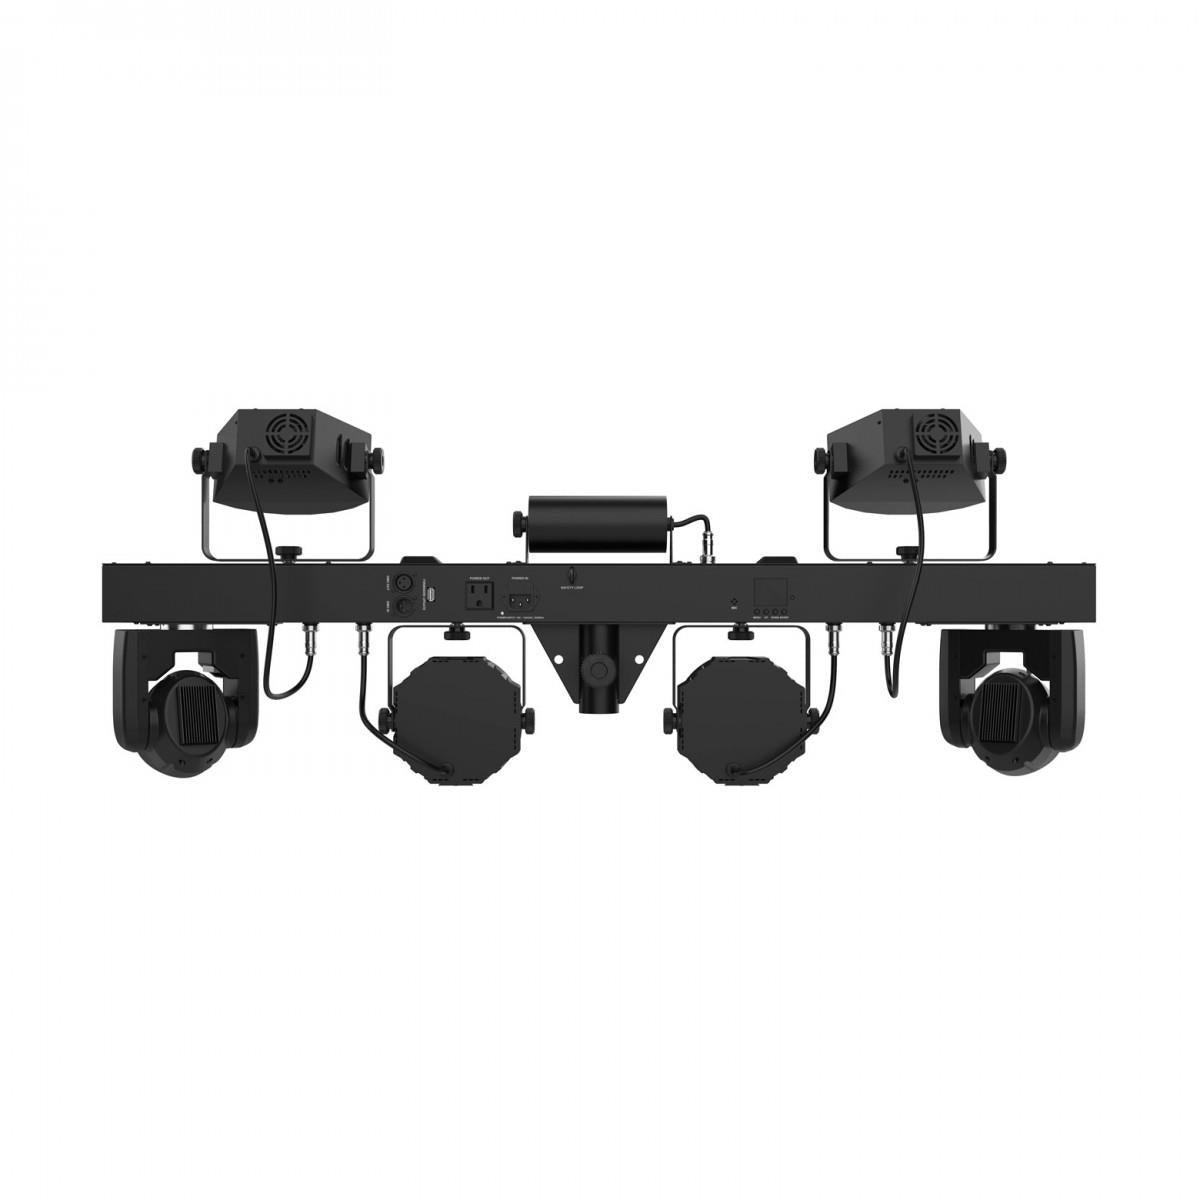 Chauvet GigBAR Move ILS With 2 x Intimidator Spot 160 ILS and 2 X Slimpar H6 and ILS Command Bundle - DY Pro Audio